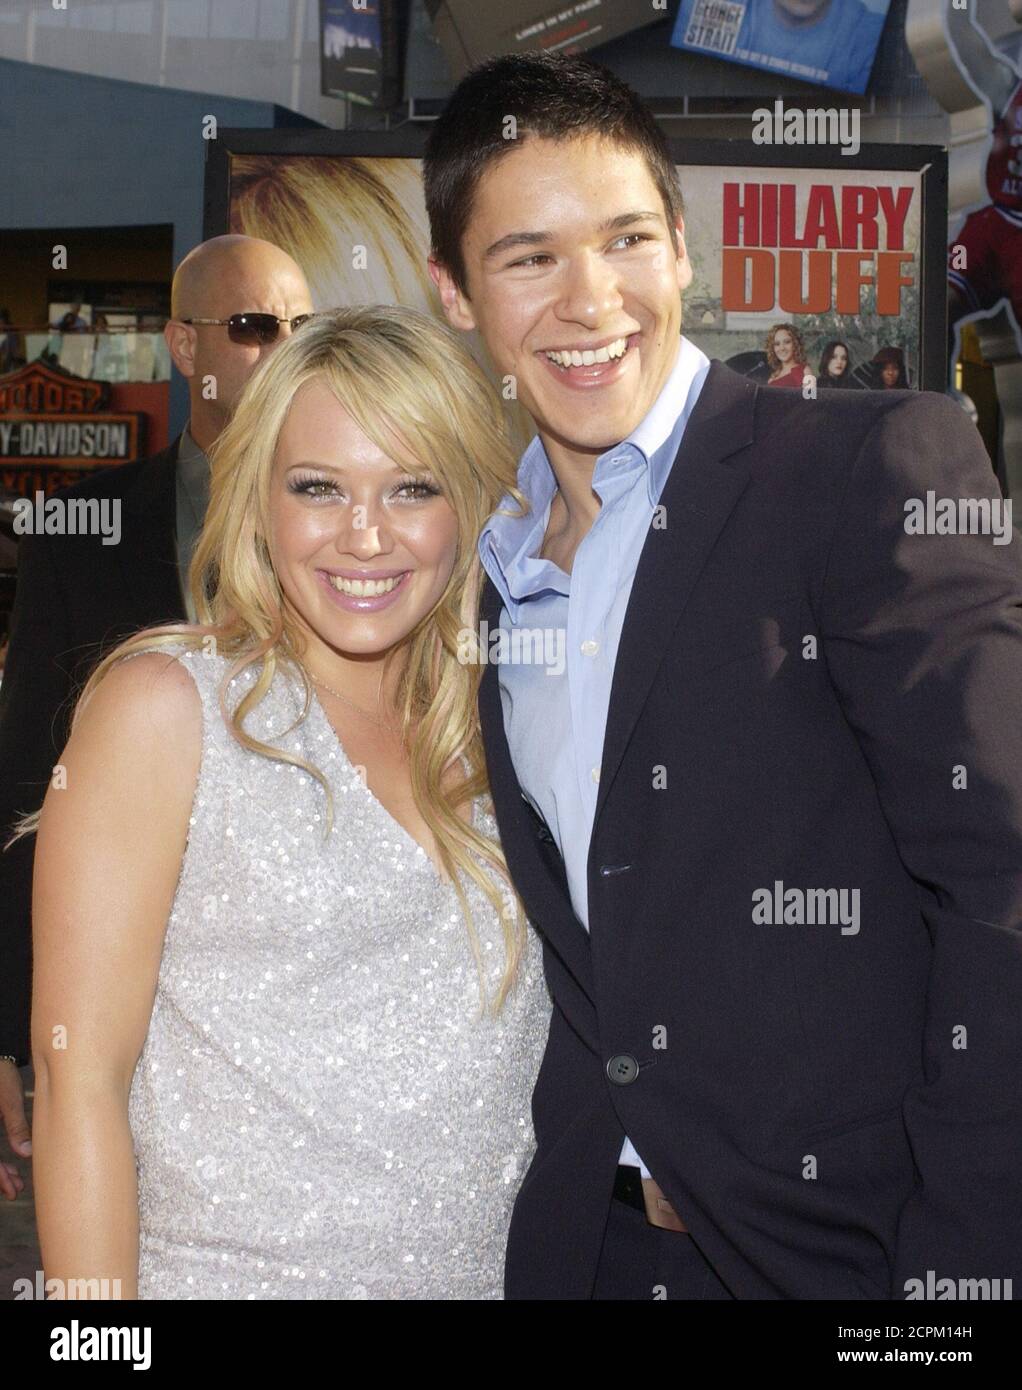 Hilary Duff (L) and Oliver James, cast members in the romantic drama motion  picture "Raise Your Voice," pose during the premiere of the film in Los  Angeles, California October 3, 2004. REUTERS/Jim